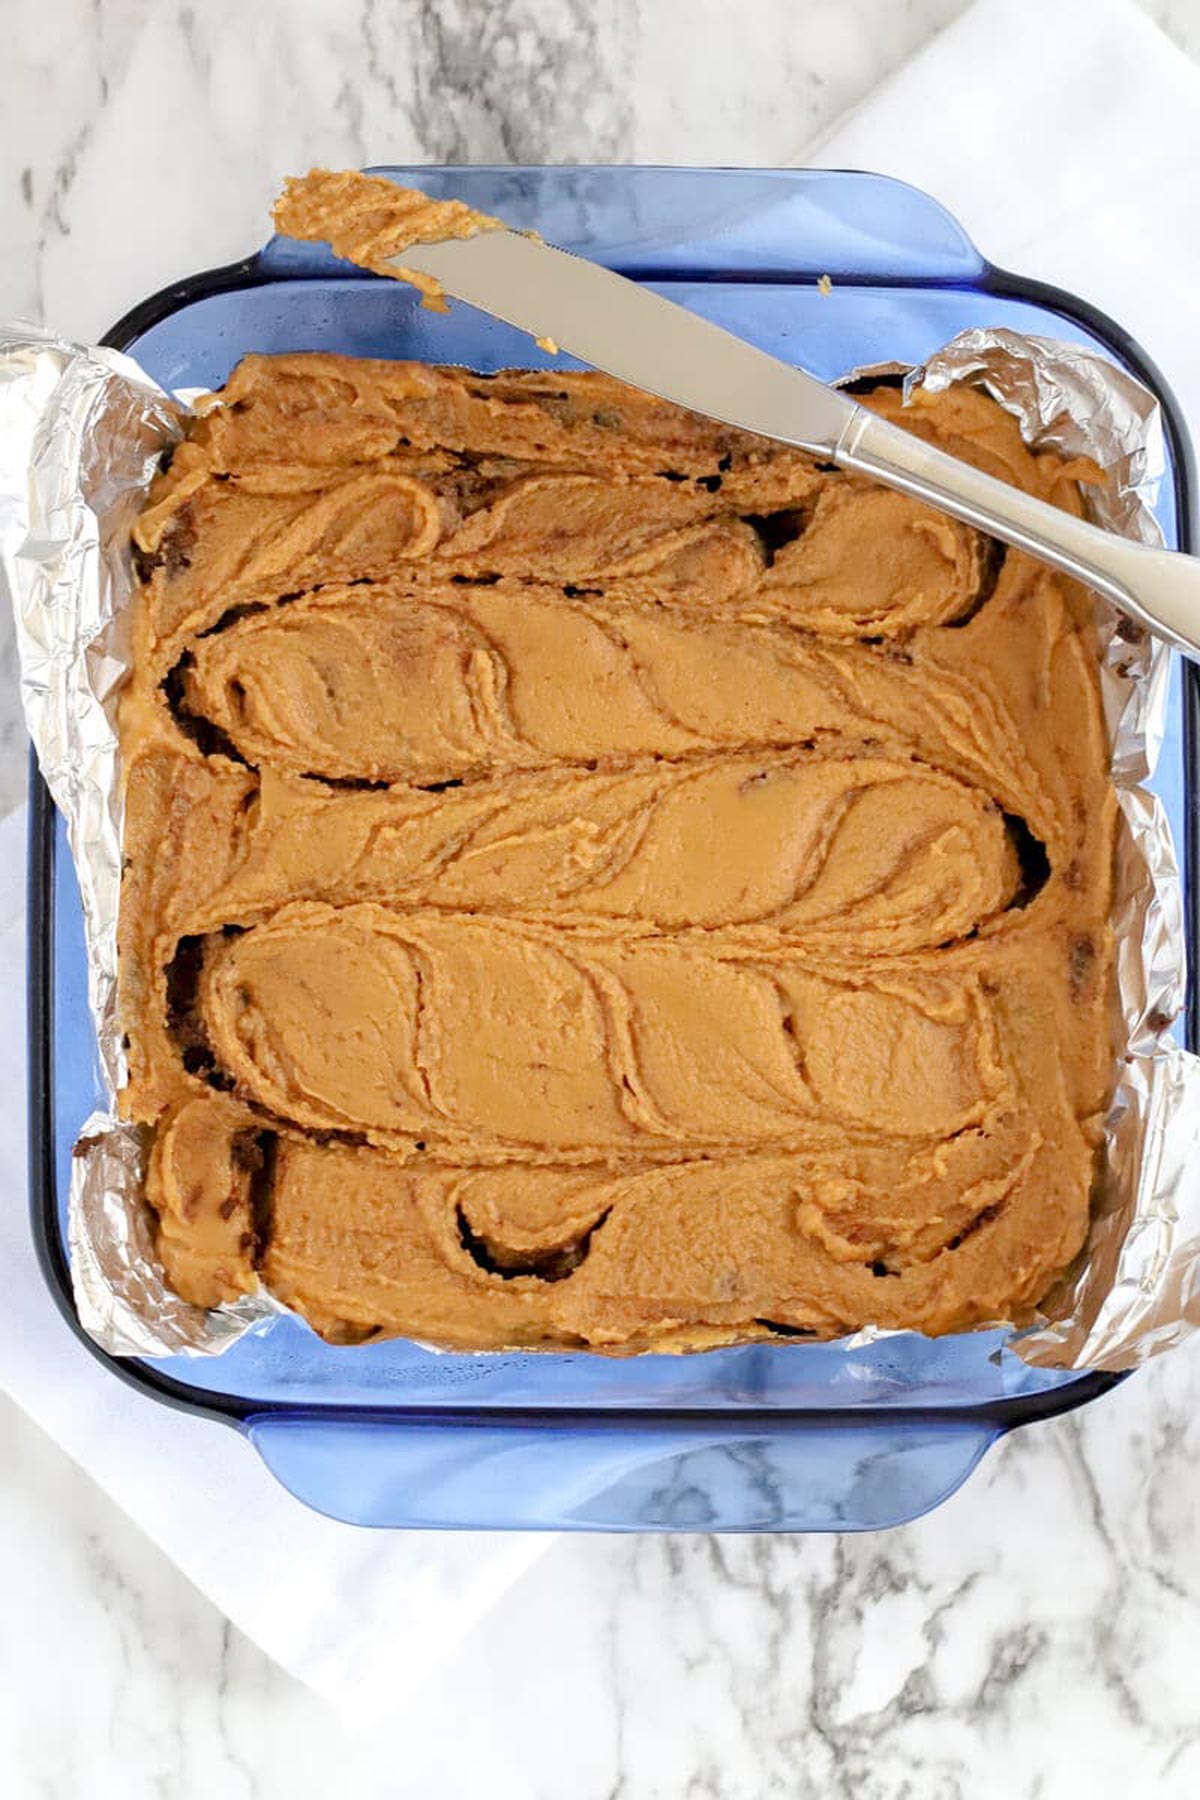 Chocolate Peanut Butter Fudge swirled with a butter knife in a blue baking dish.